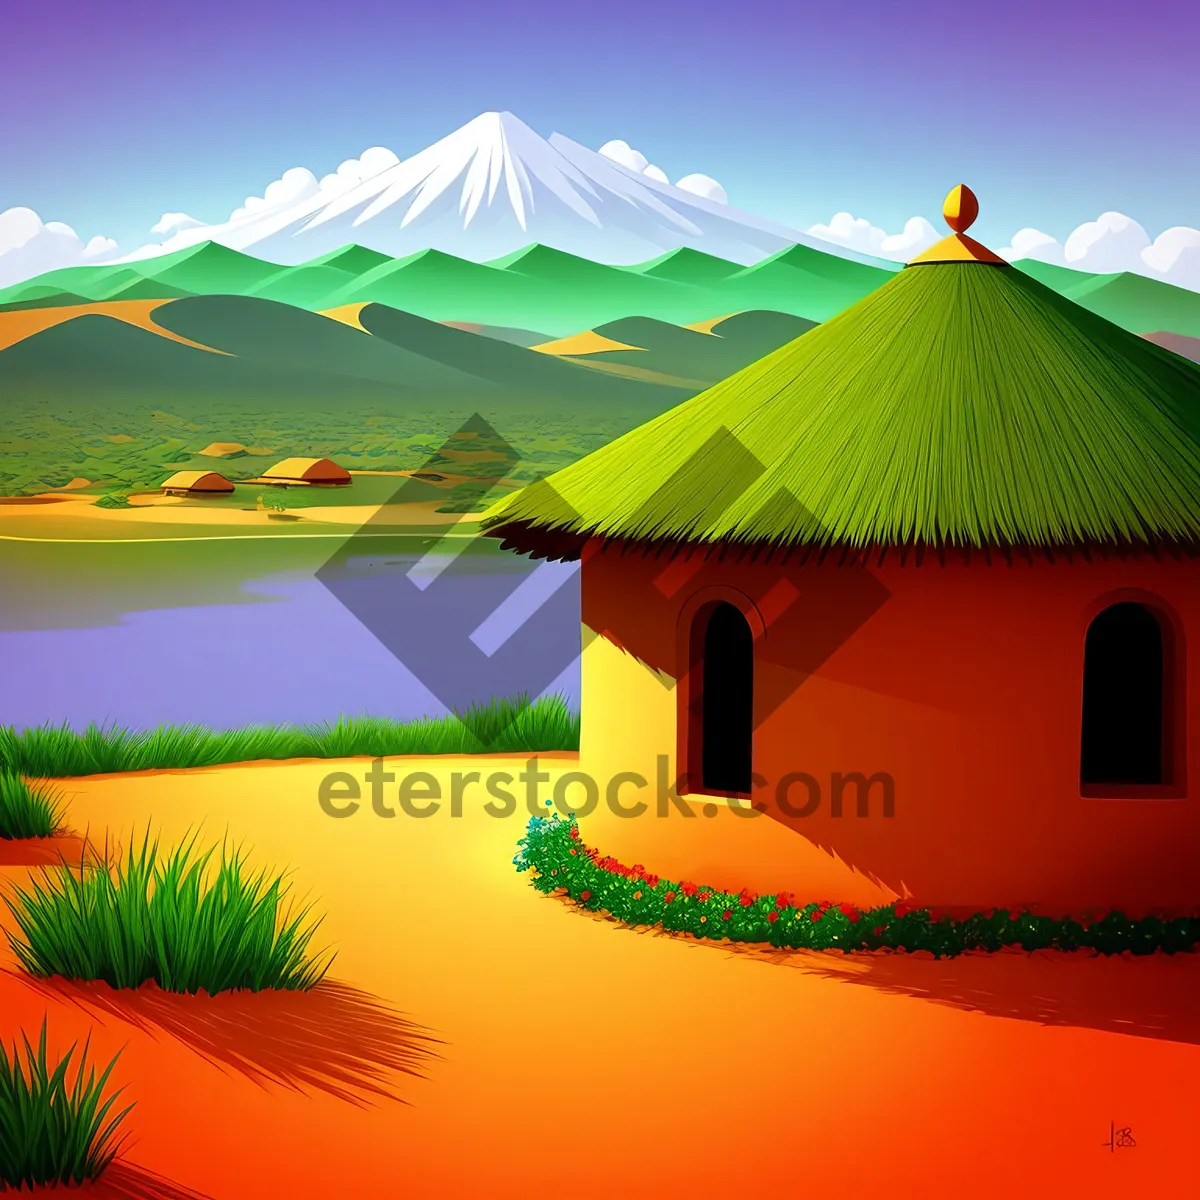 Picture of Serene Summer Sky: Picturesque Hovel amidst Lush Greenery